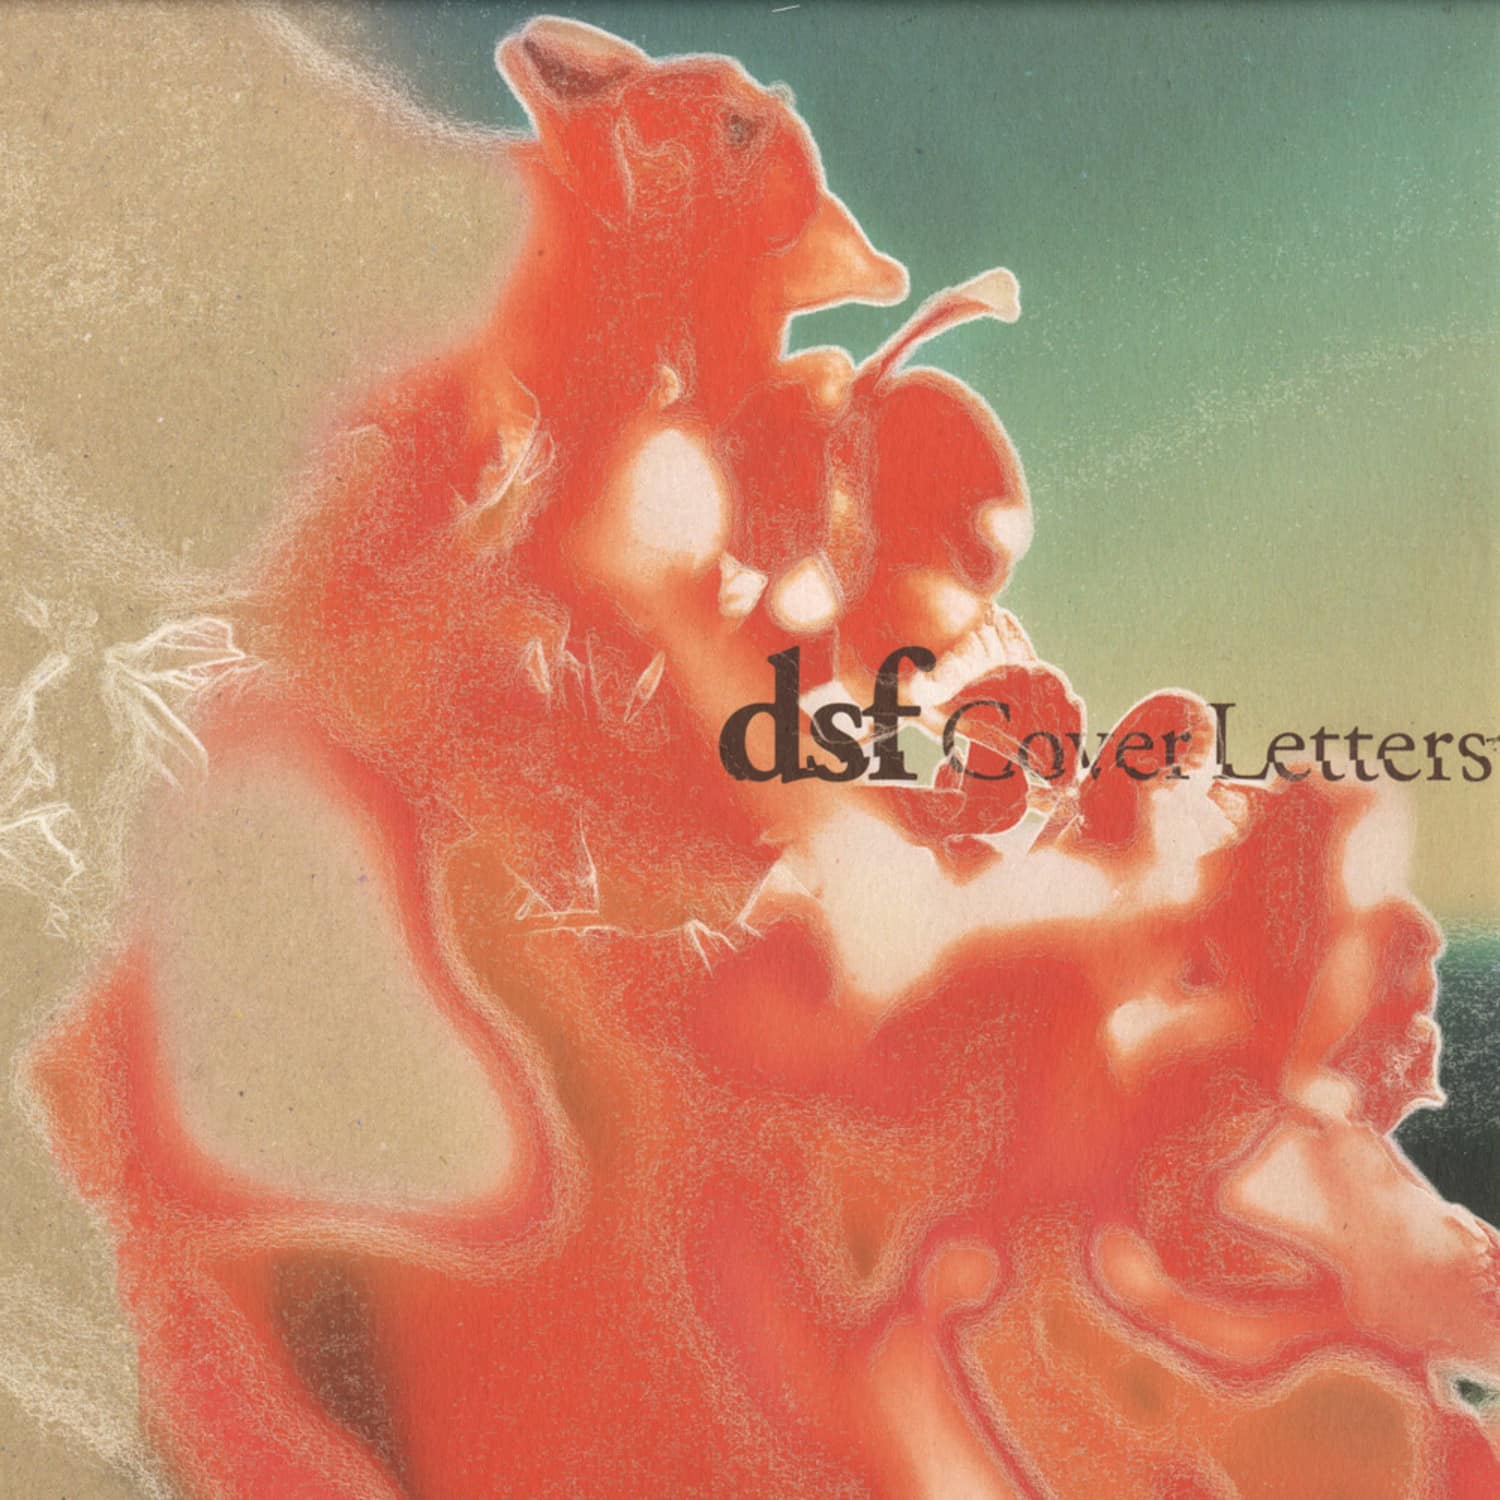 DSF - COVER LETTERS